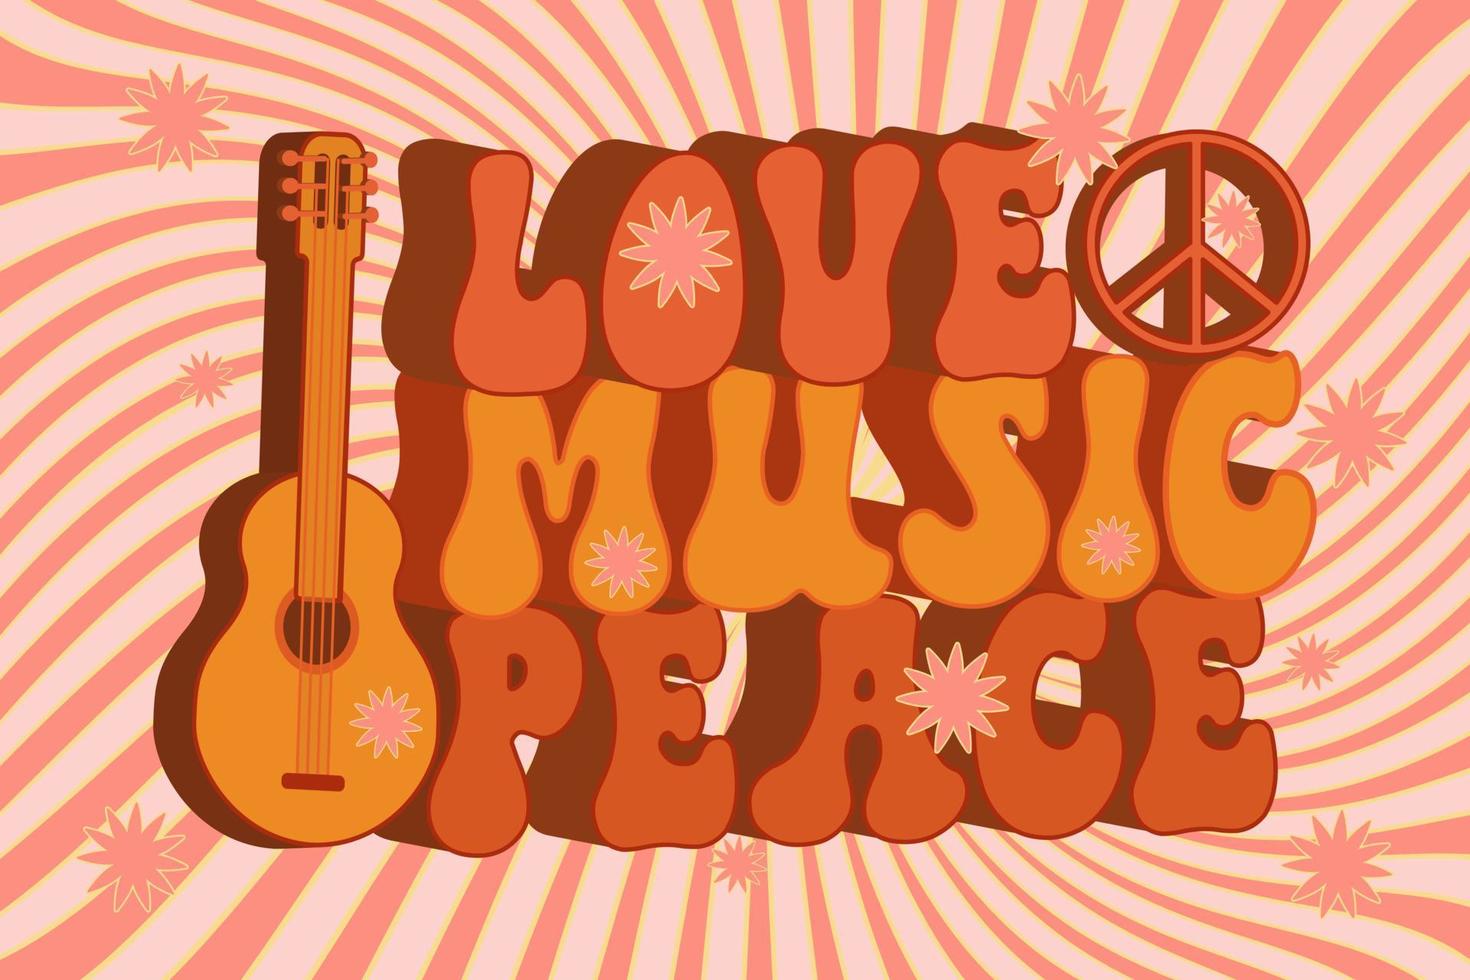 Groovy music love peace with retro guitar. Hippie style. Vintage art design. Musical instrument. Cartoon. Vector illustration on a jolly background.